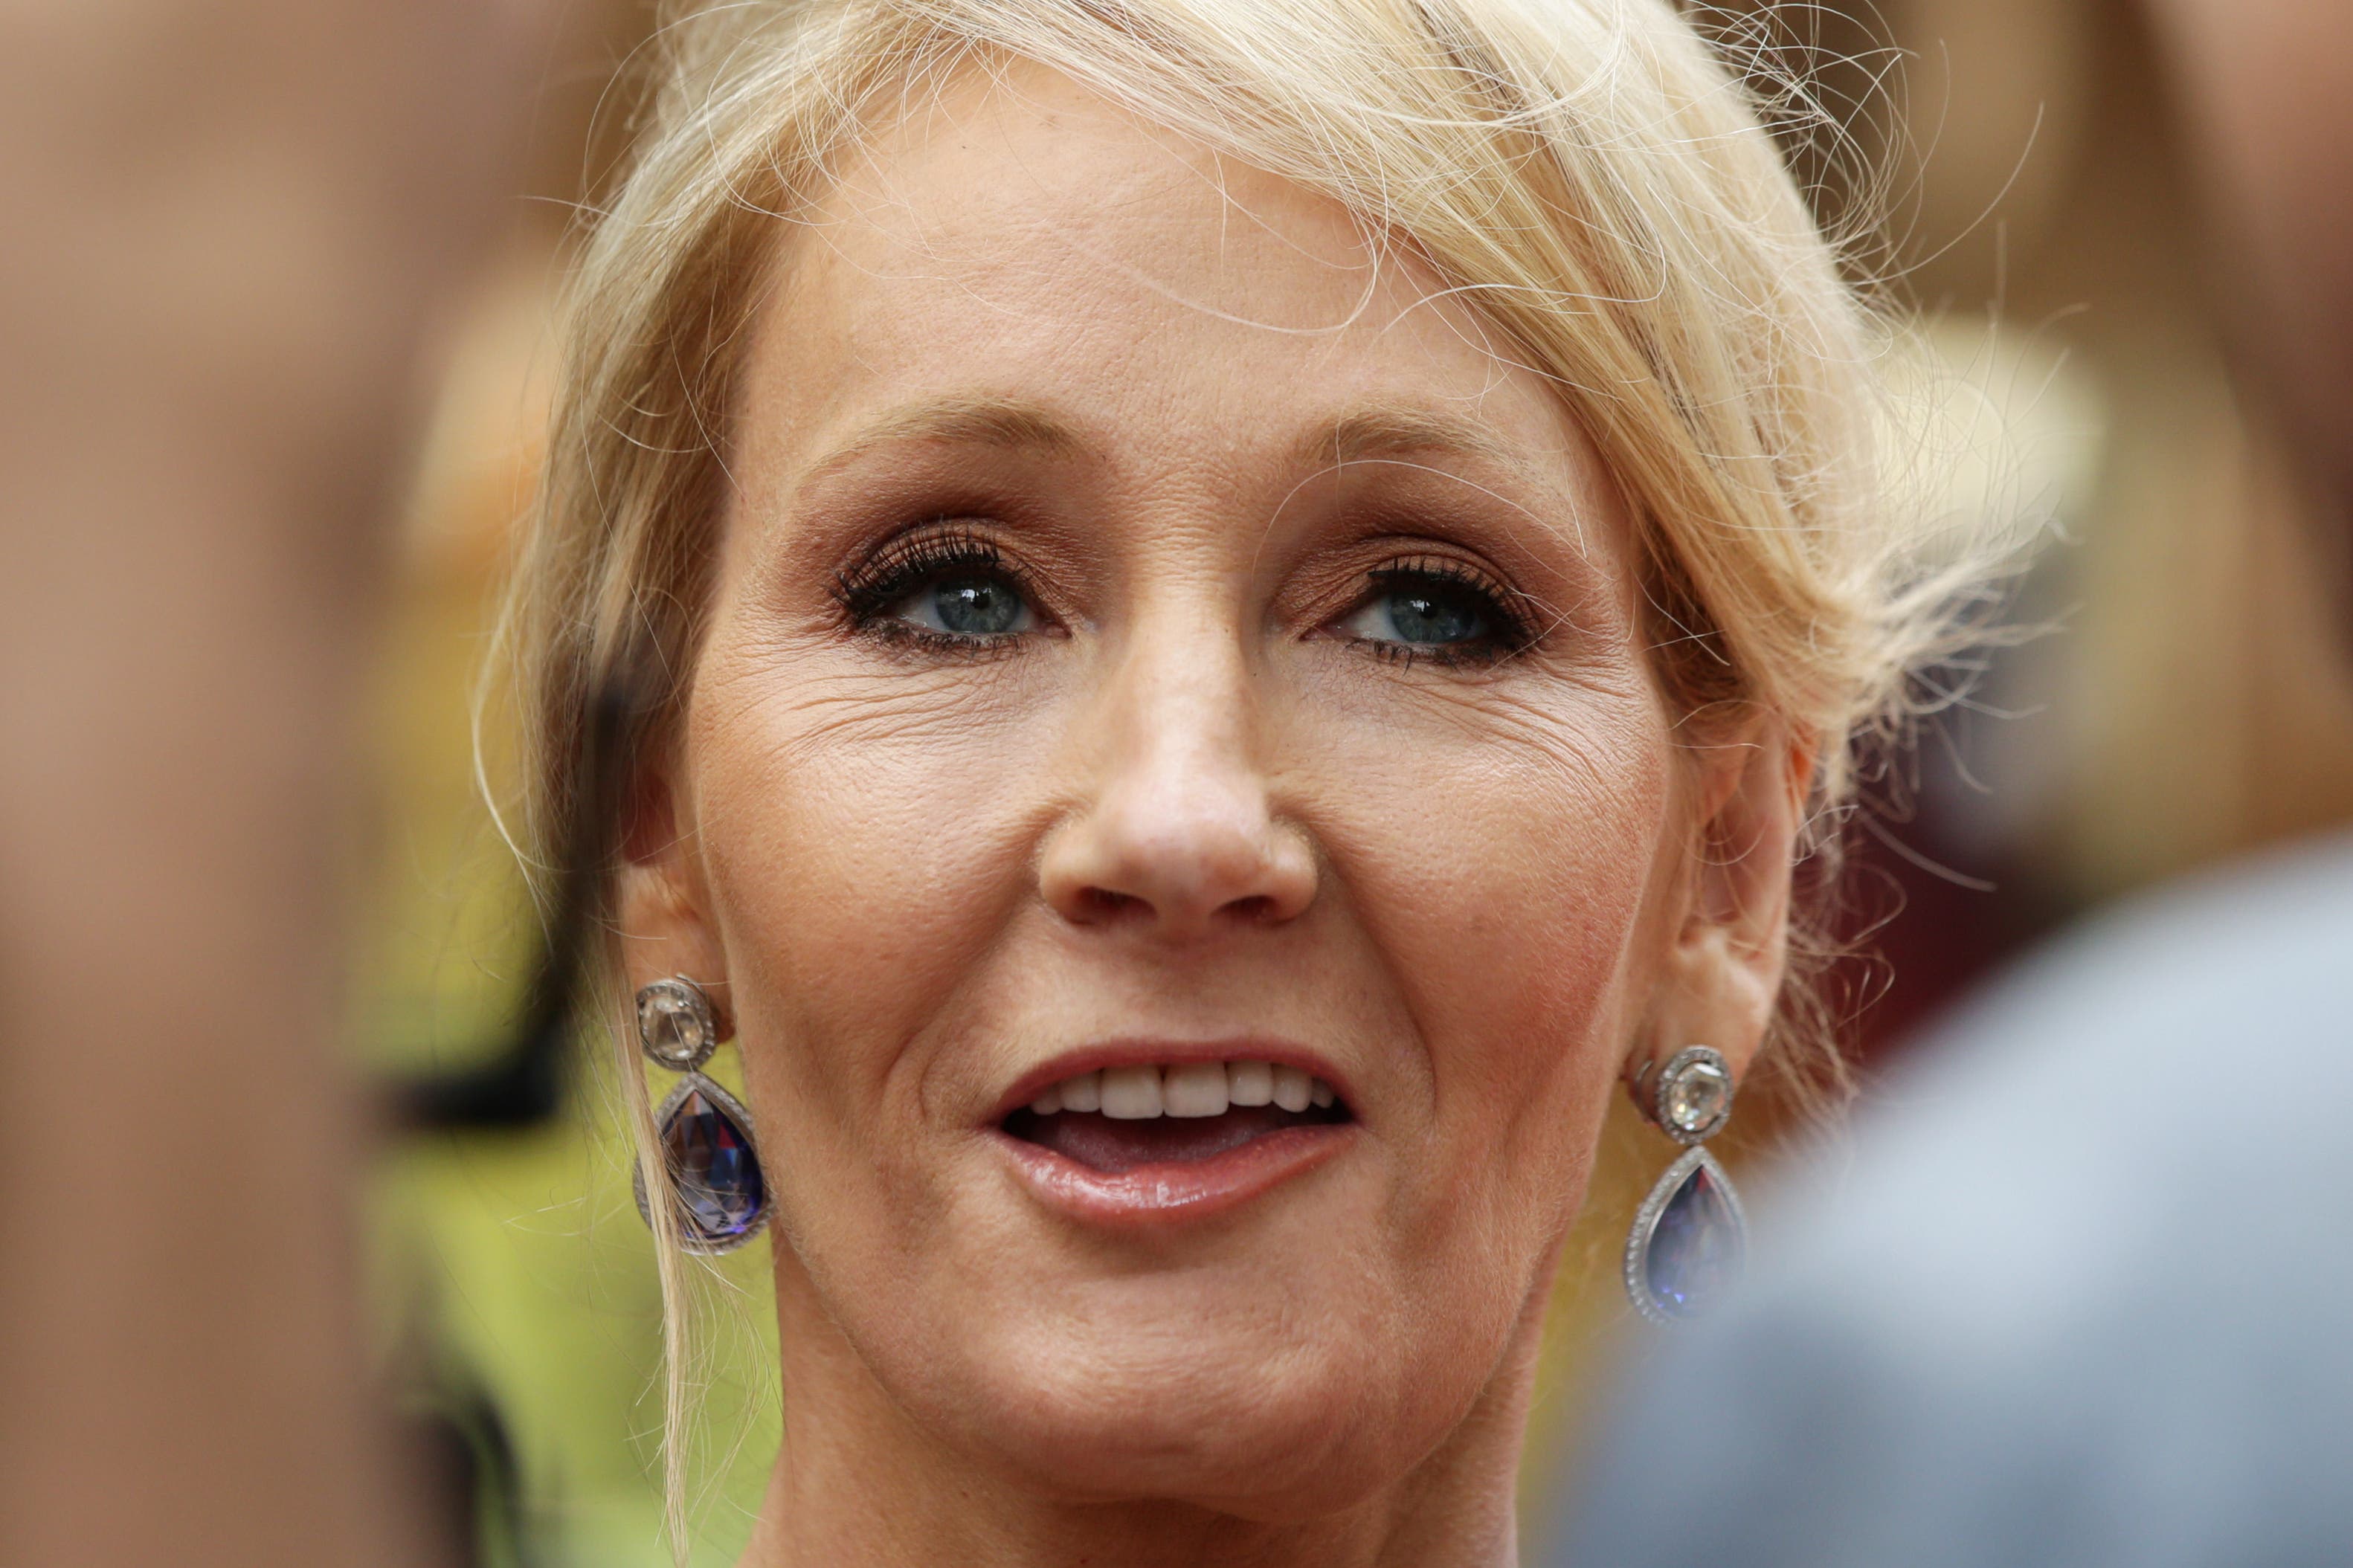 JK Rowling is on track to become a billionaire again